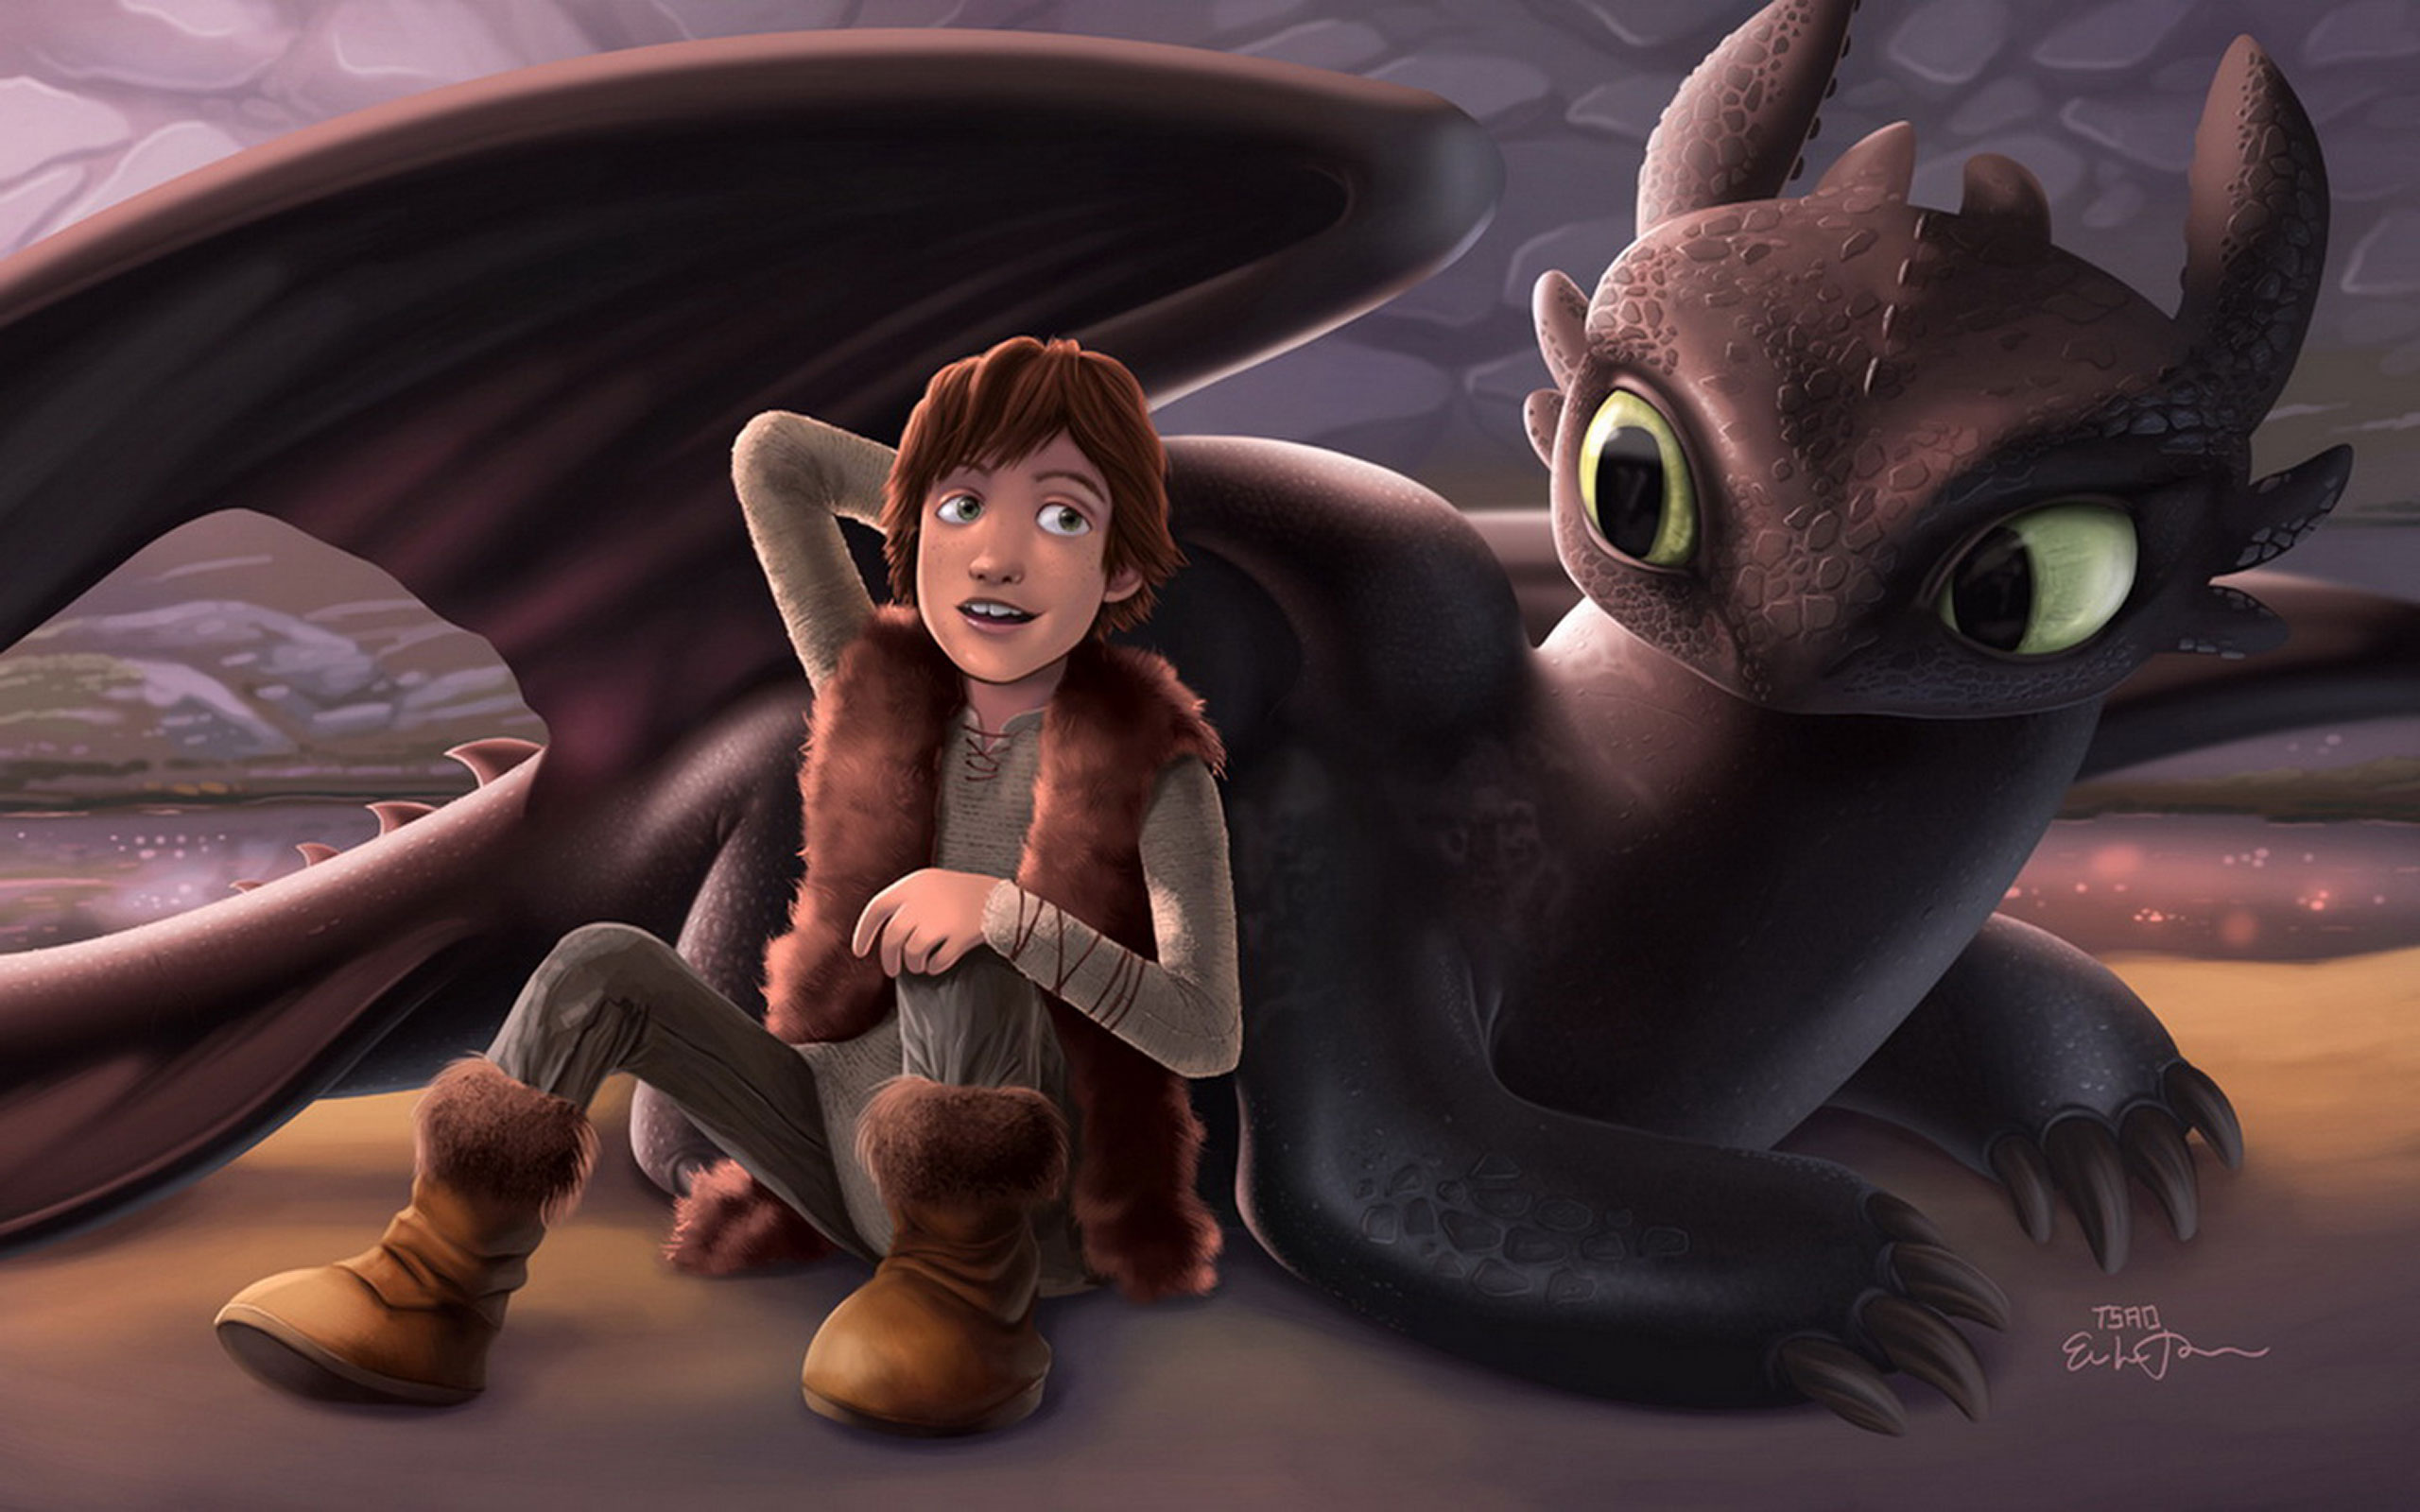 movie, how to train your dragon, hiccup (how to train your dragon), toothless (how to train your dragon)